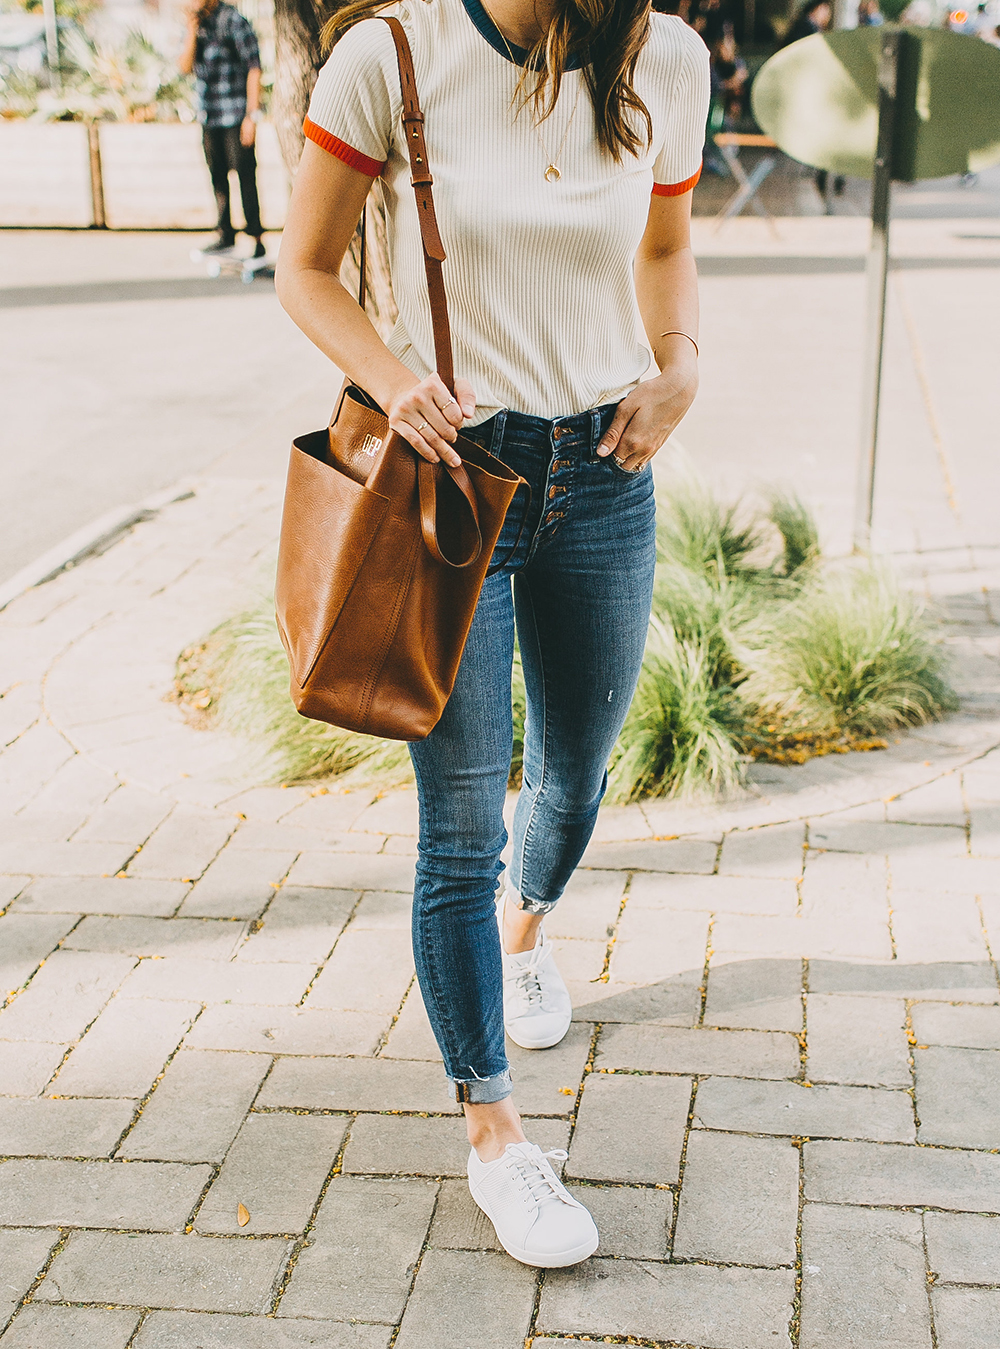 Walk To Work Day - LivvyLand | Austin Fashion and Style Blogger